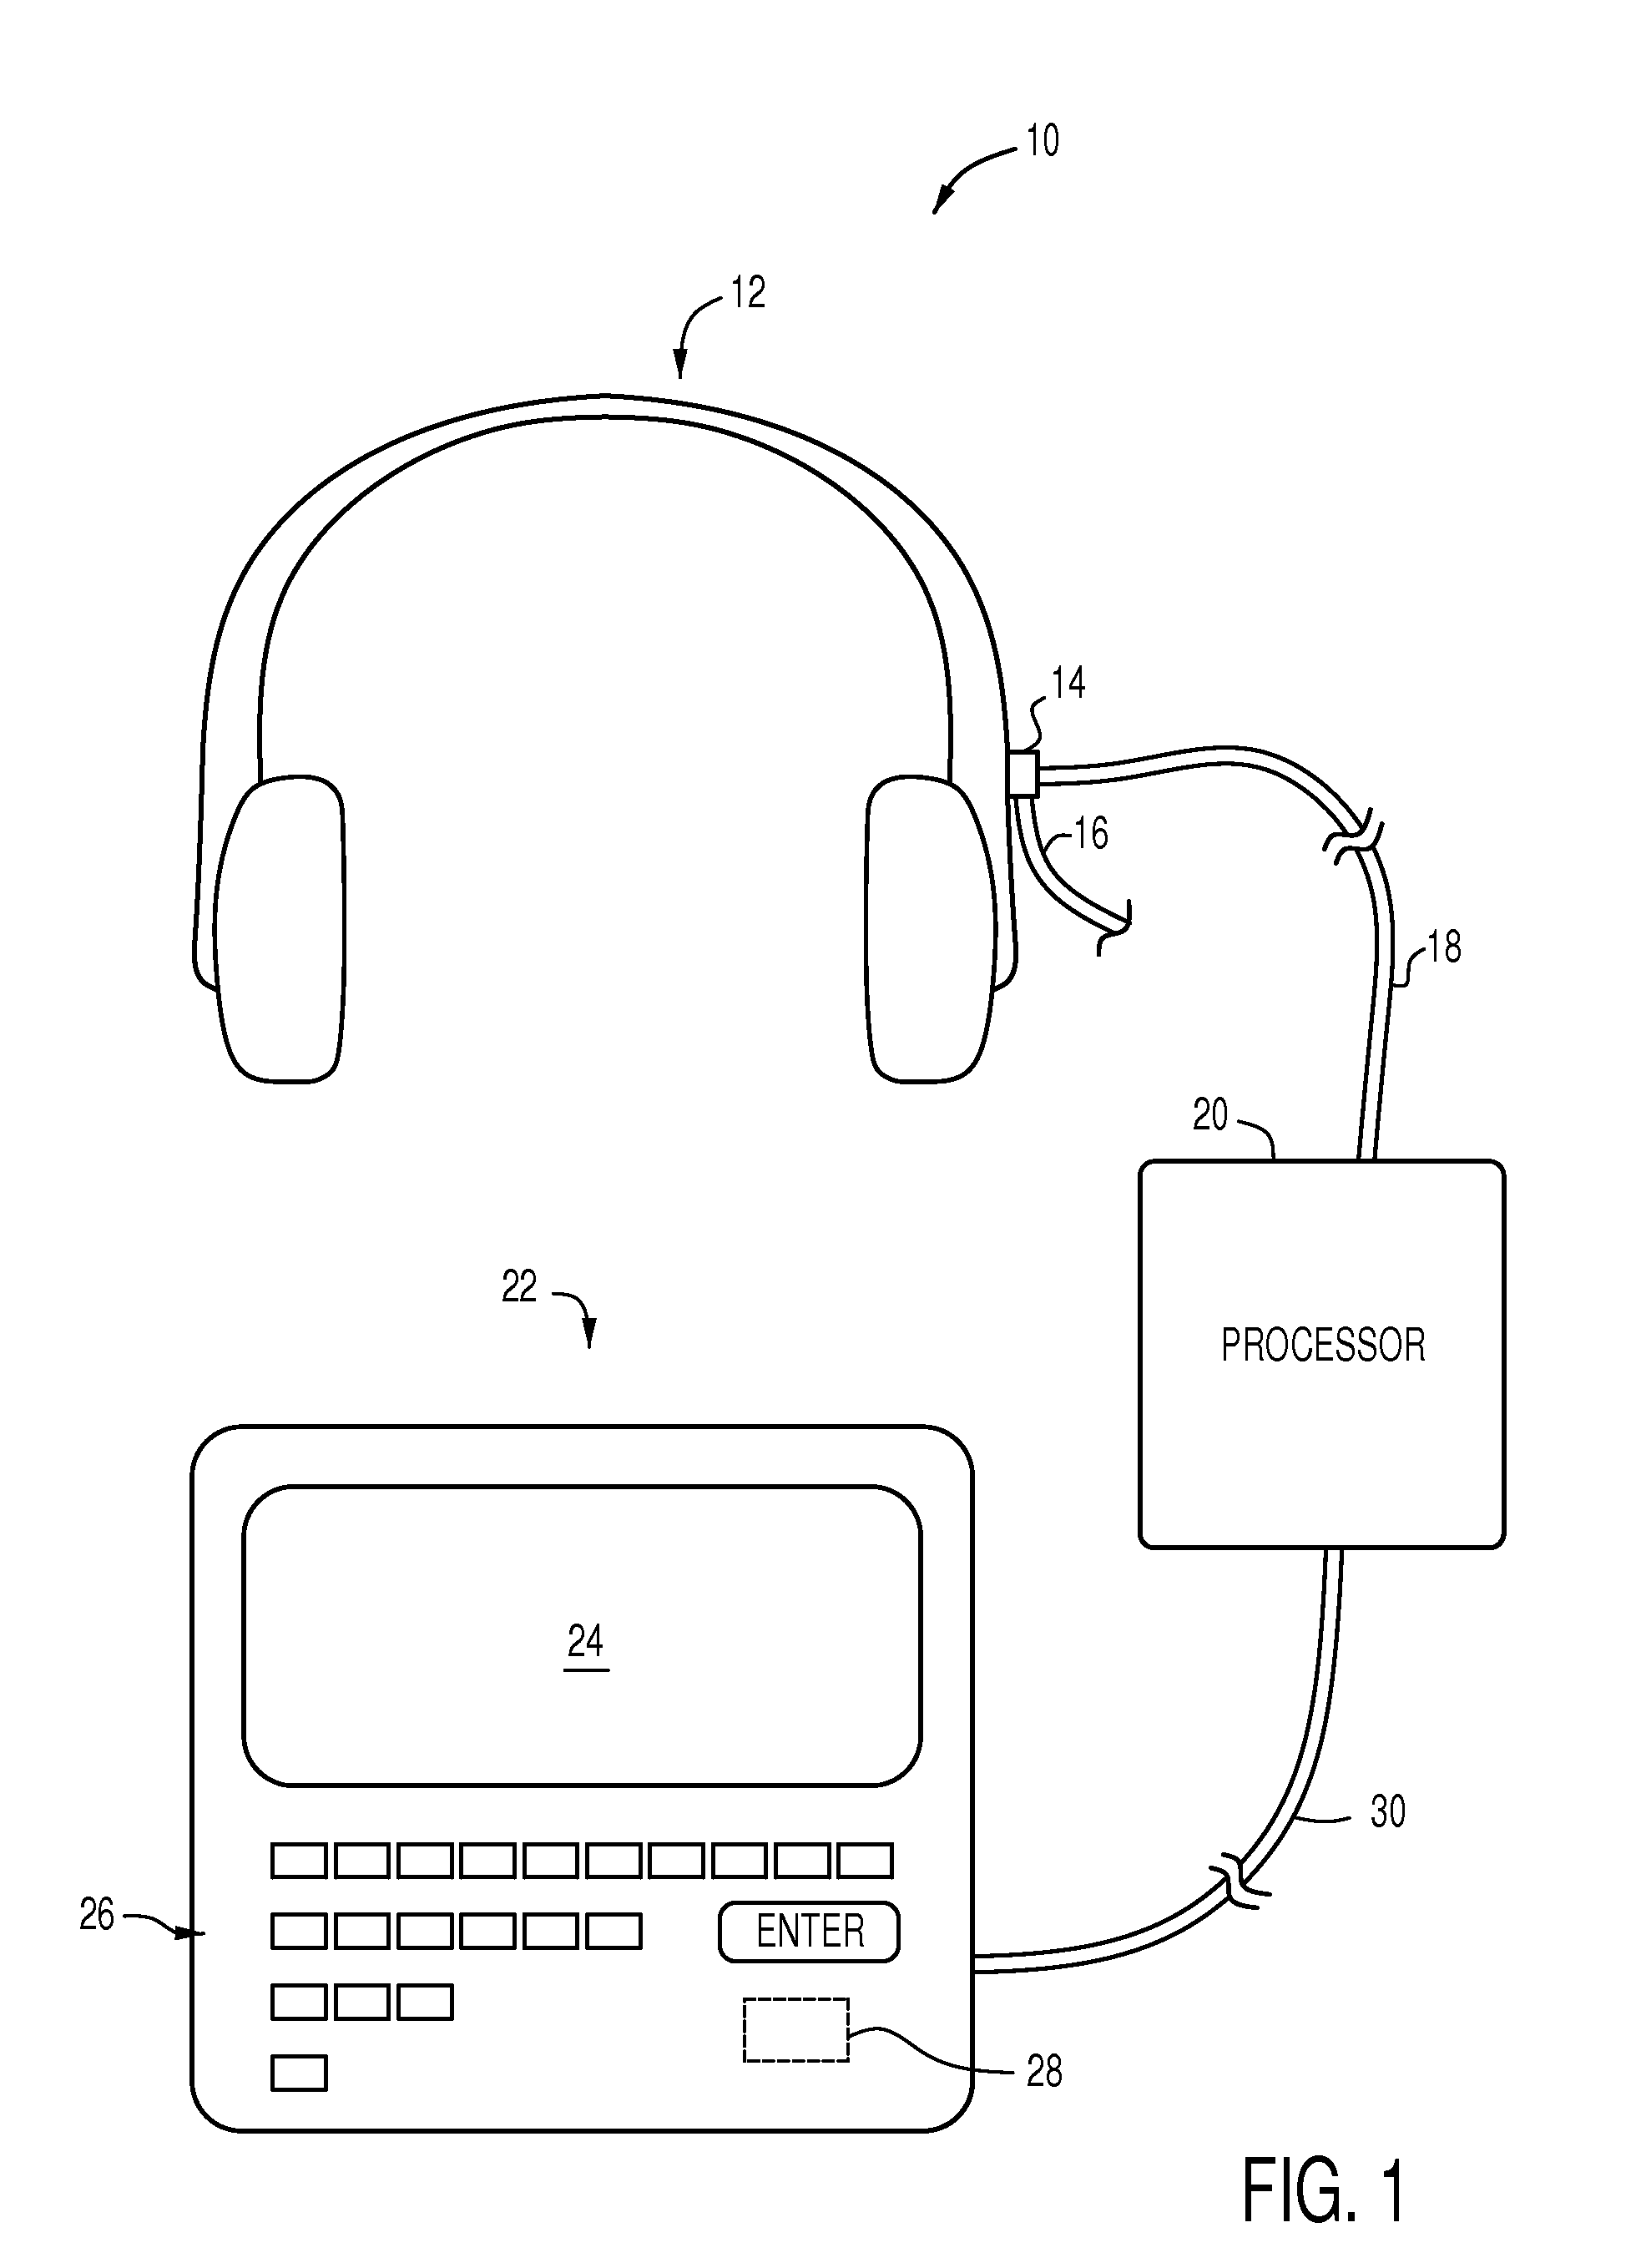 Graphic display system for assisting vehicle operators